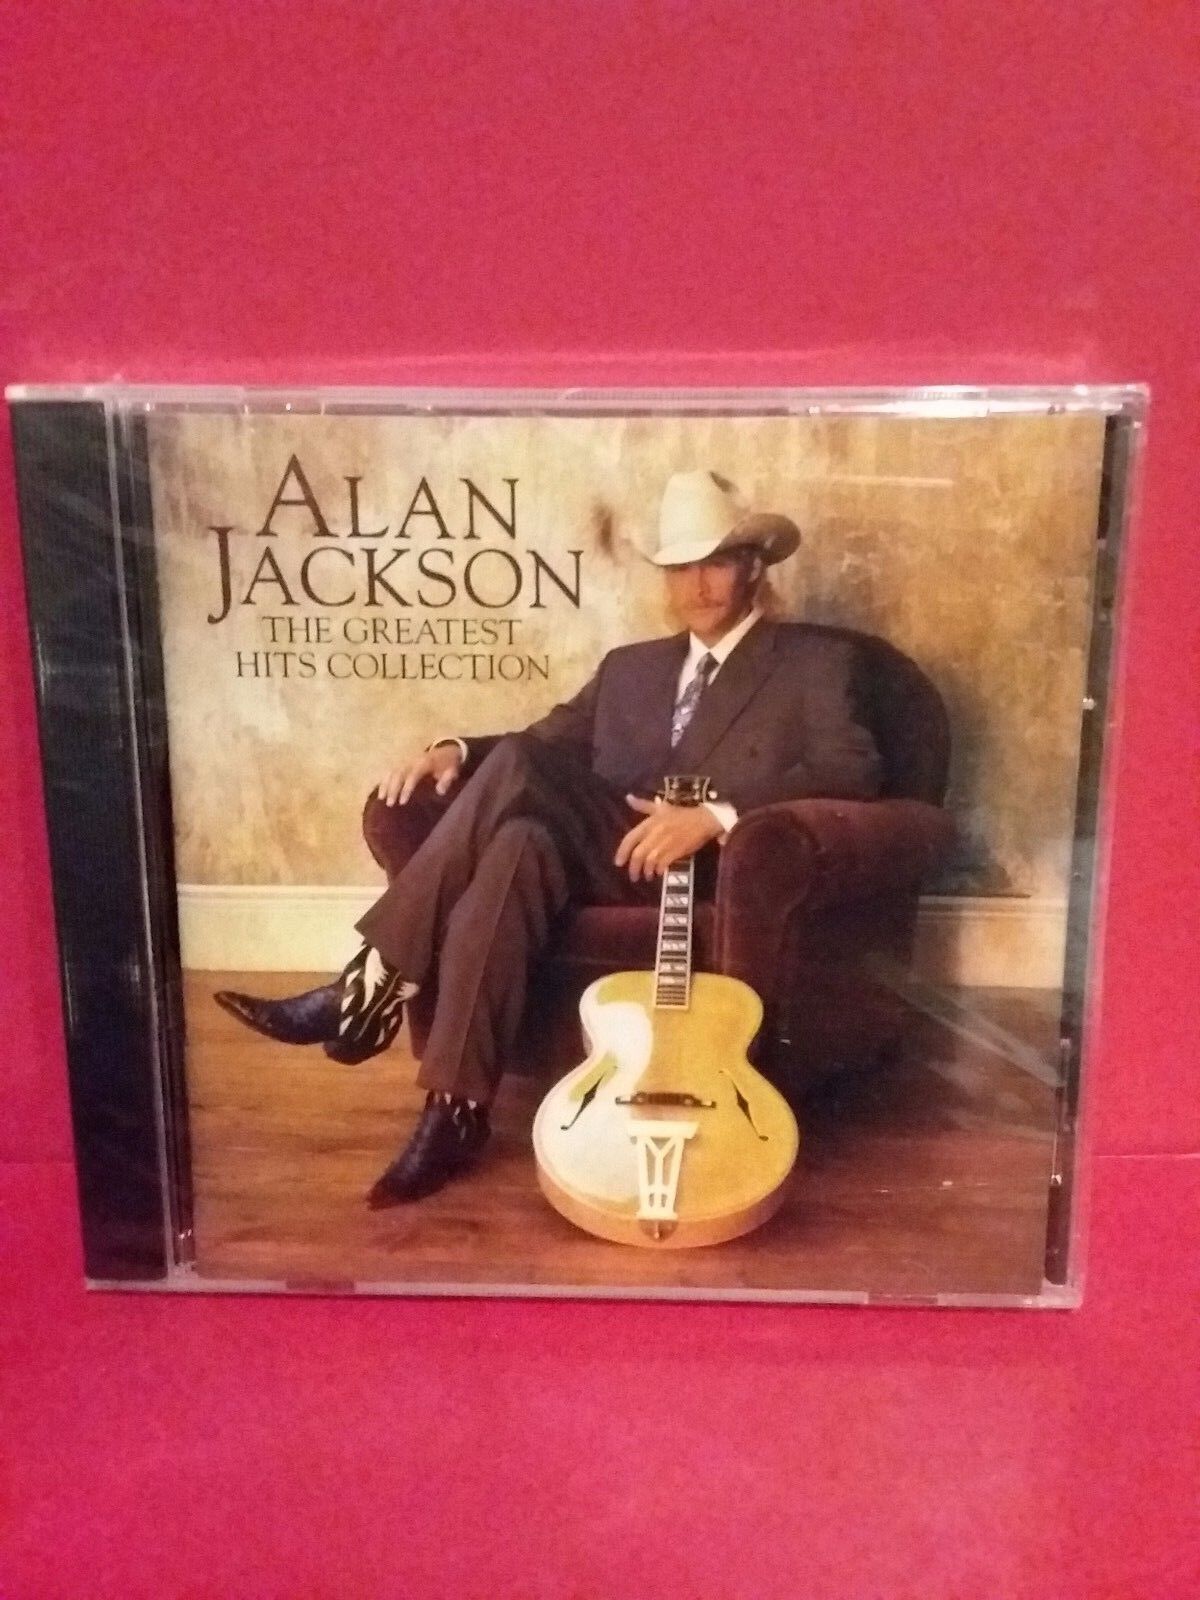 CD Alan Jackson The Greastest Hits Collection New and Sealed